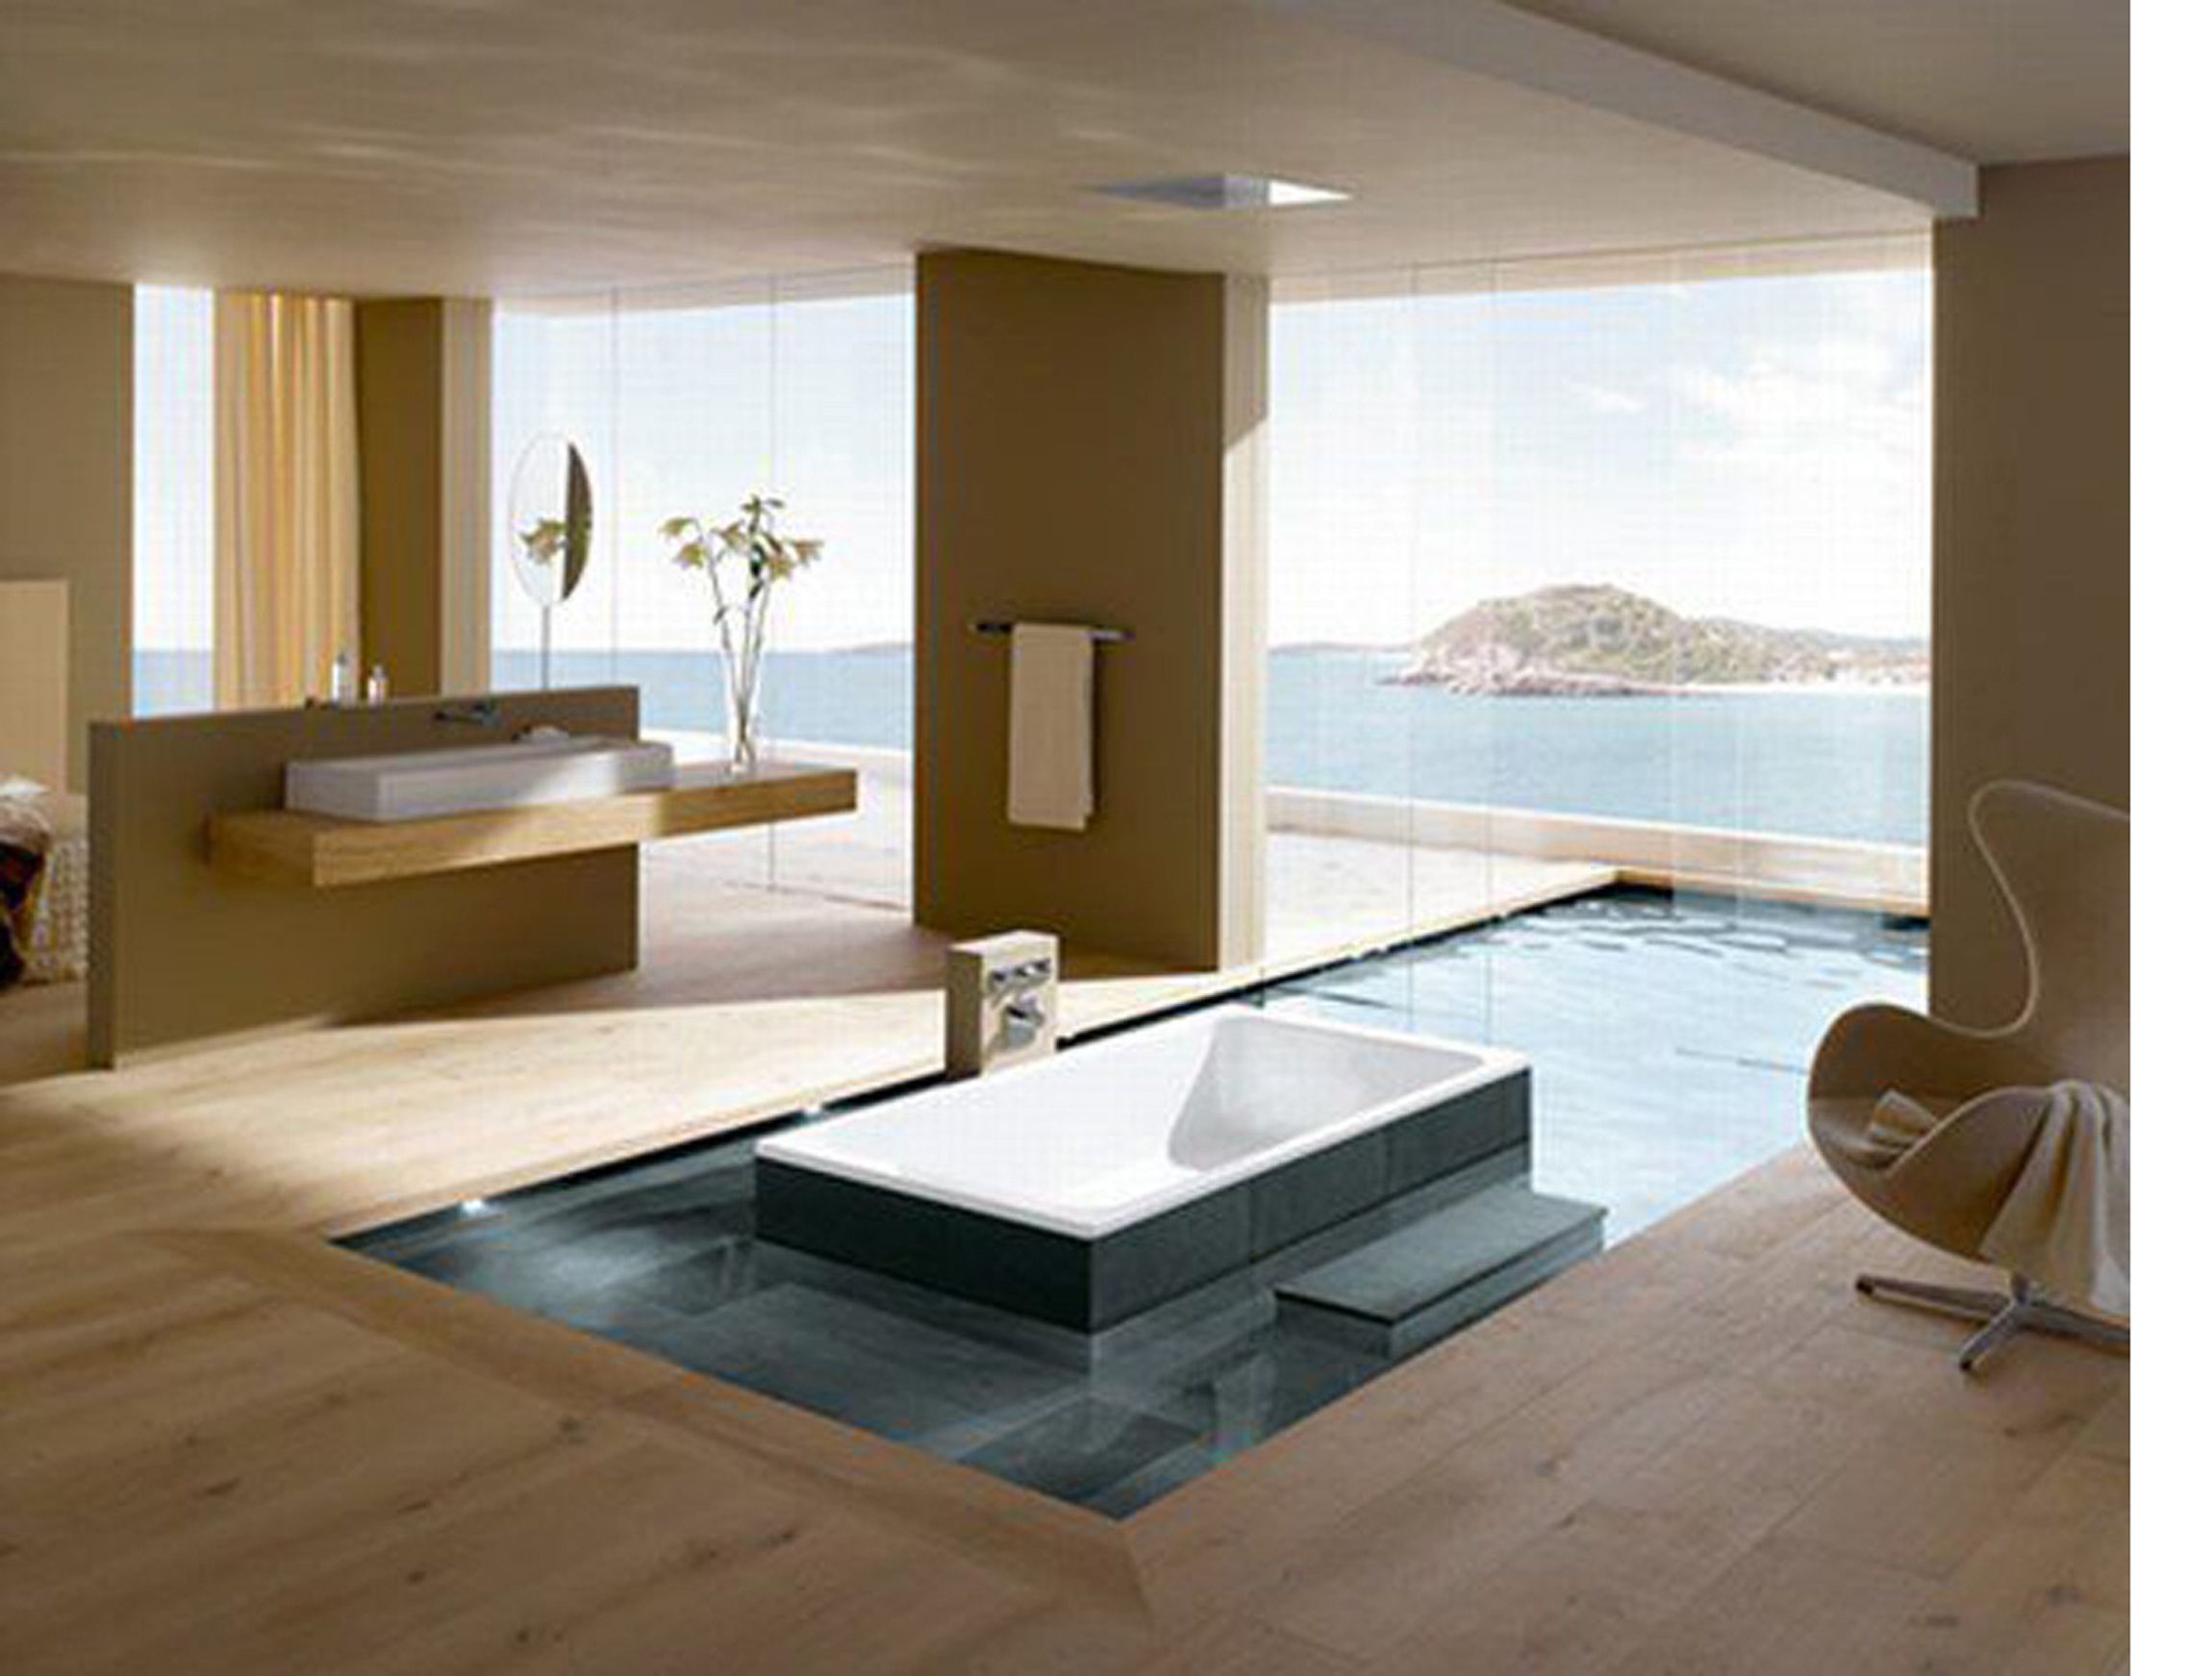 Luxury Bathroom Design Style With Jacuzzi Ideas And Wooden Deck Also With Great Freestand Whirlpools Stunning Bathrooms With Jacuzzi Design (View 28 of 123)